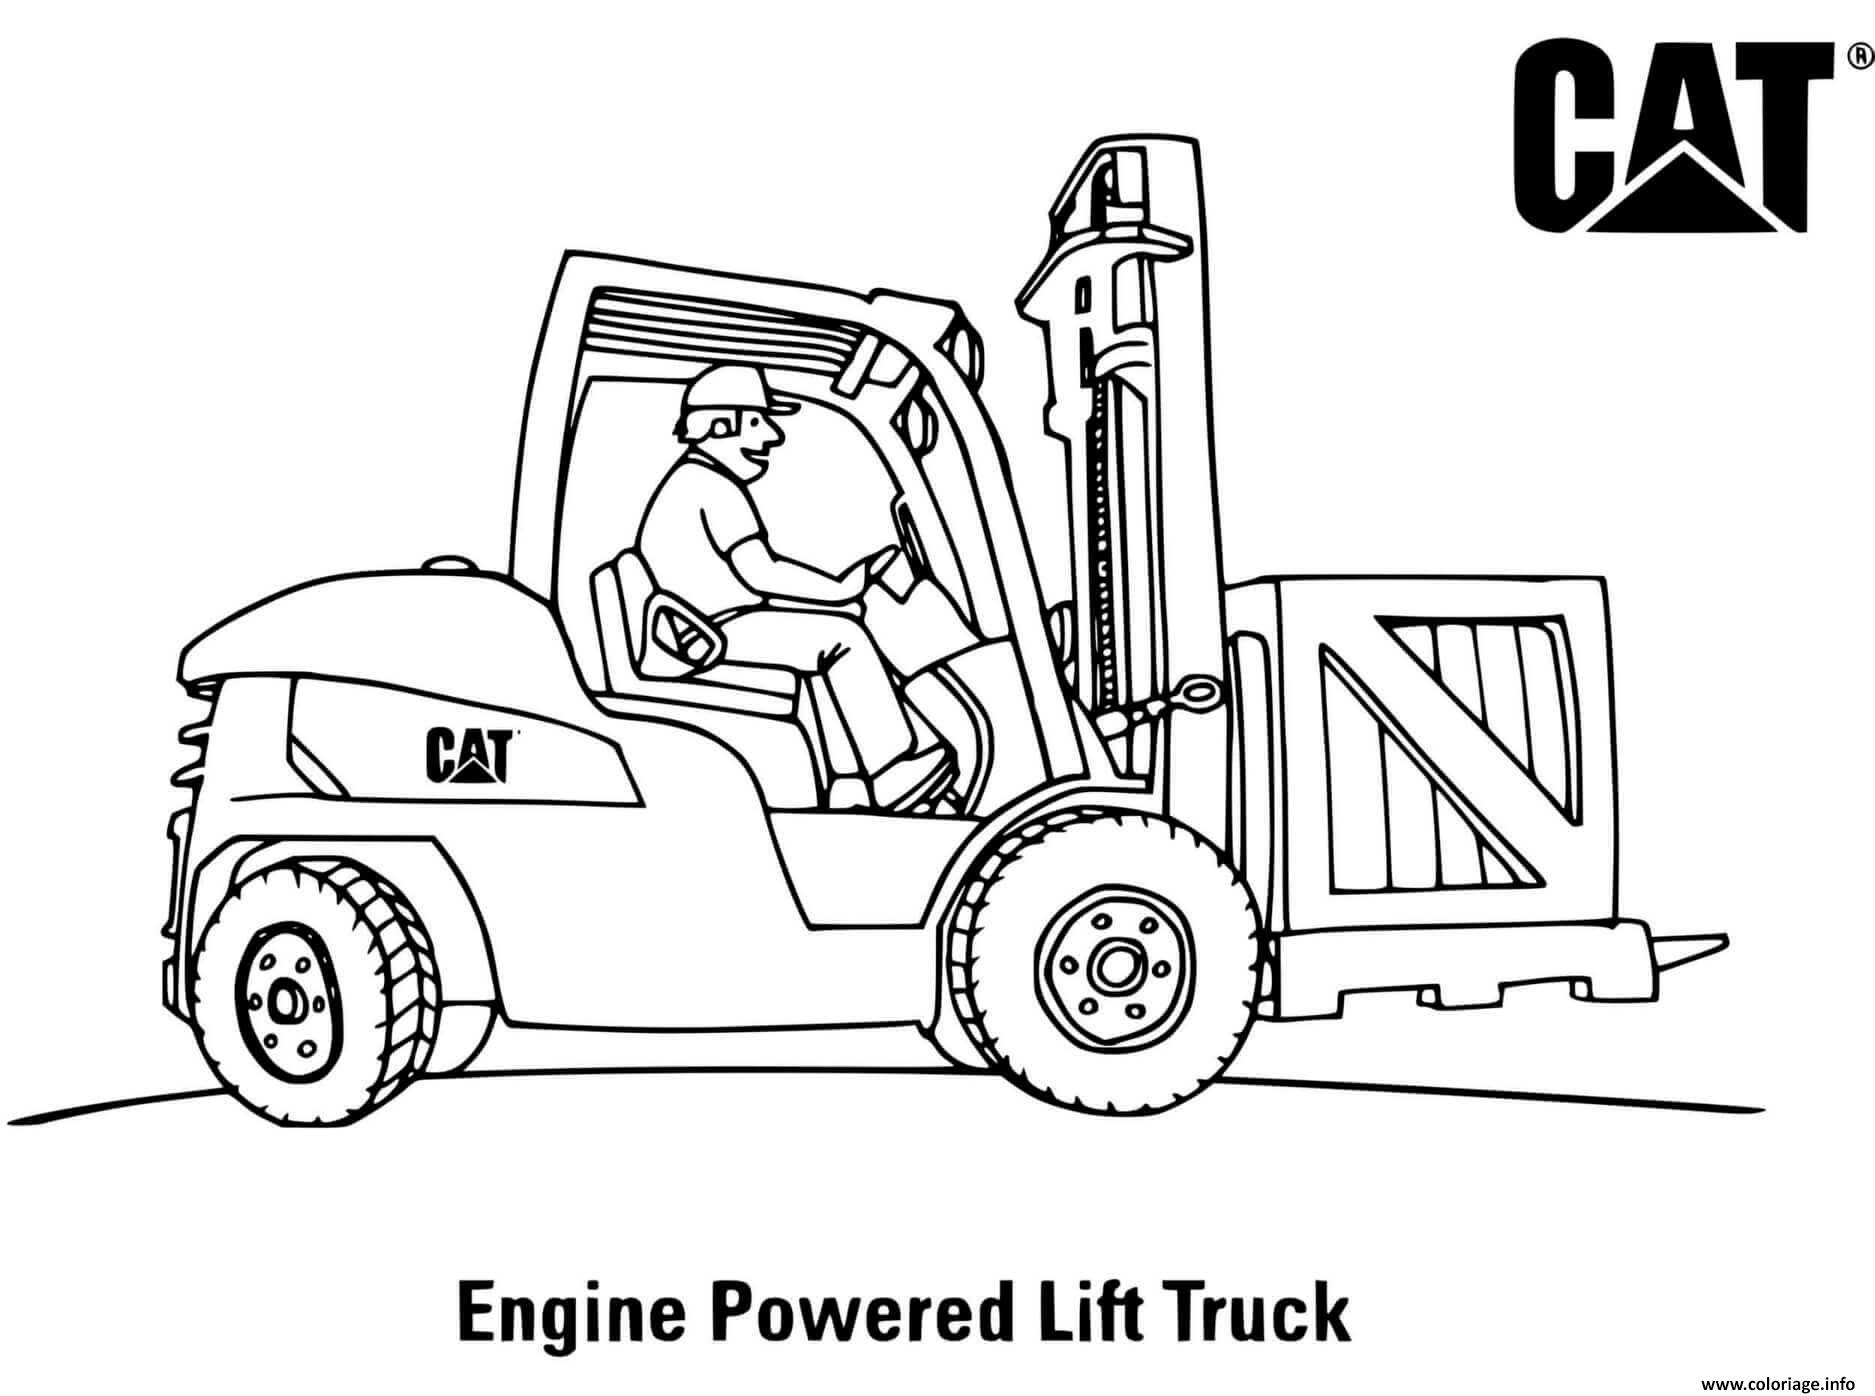 Coloriage engine powered lift truck engin chantier  JeColorie.com